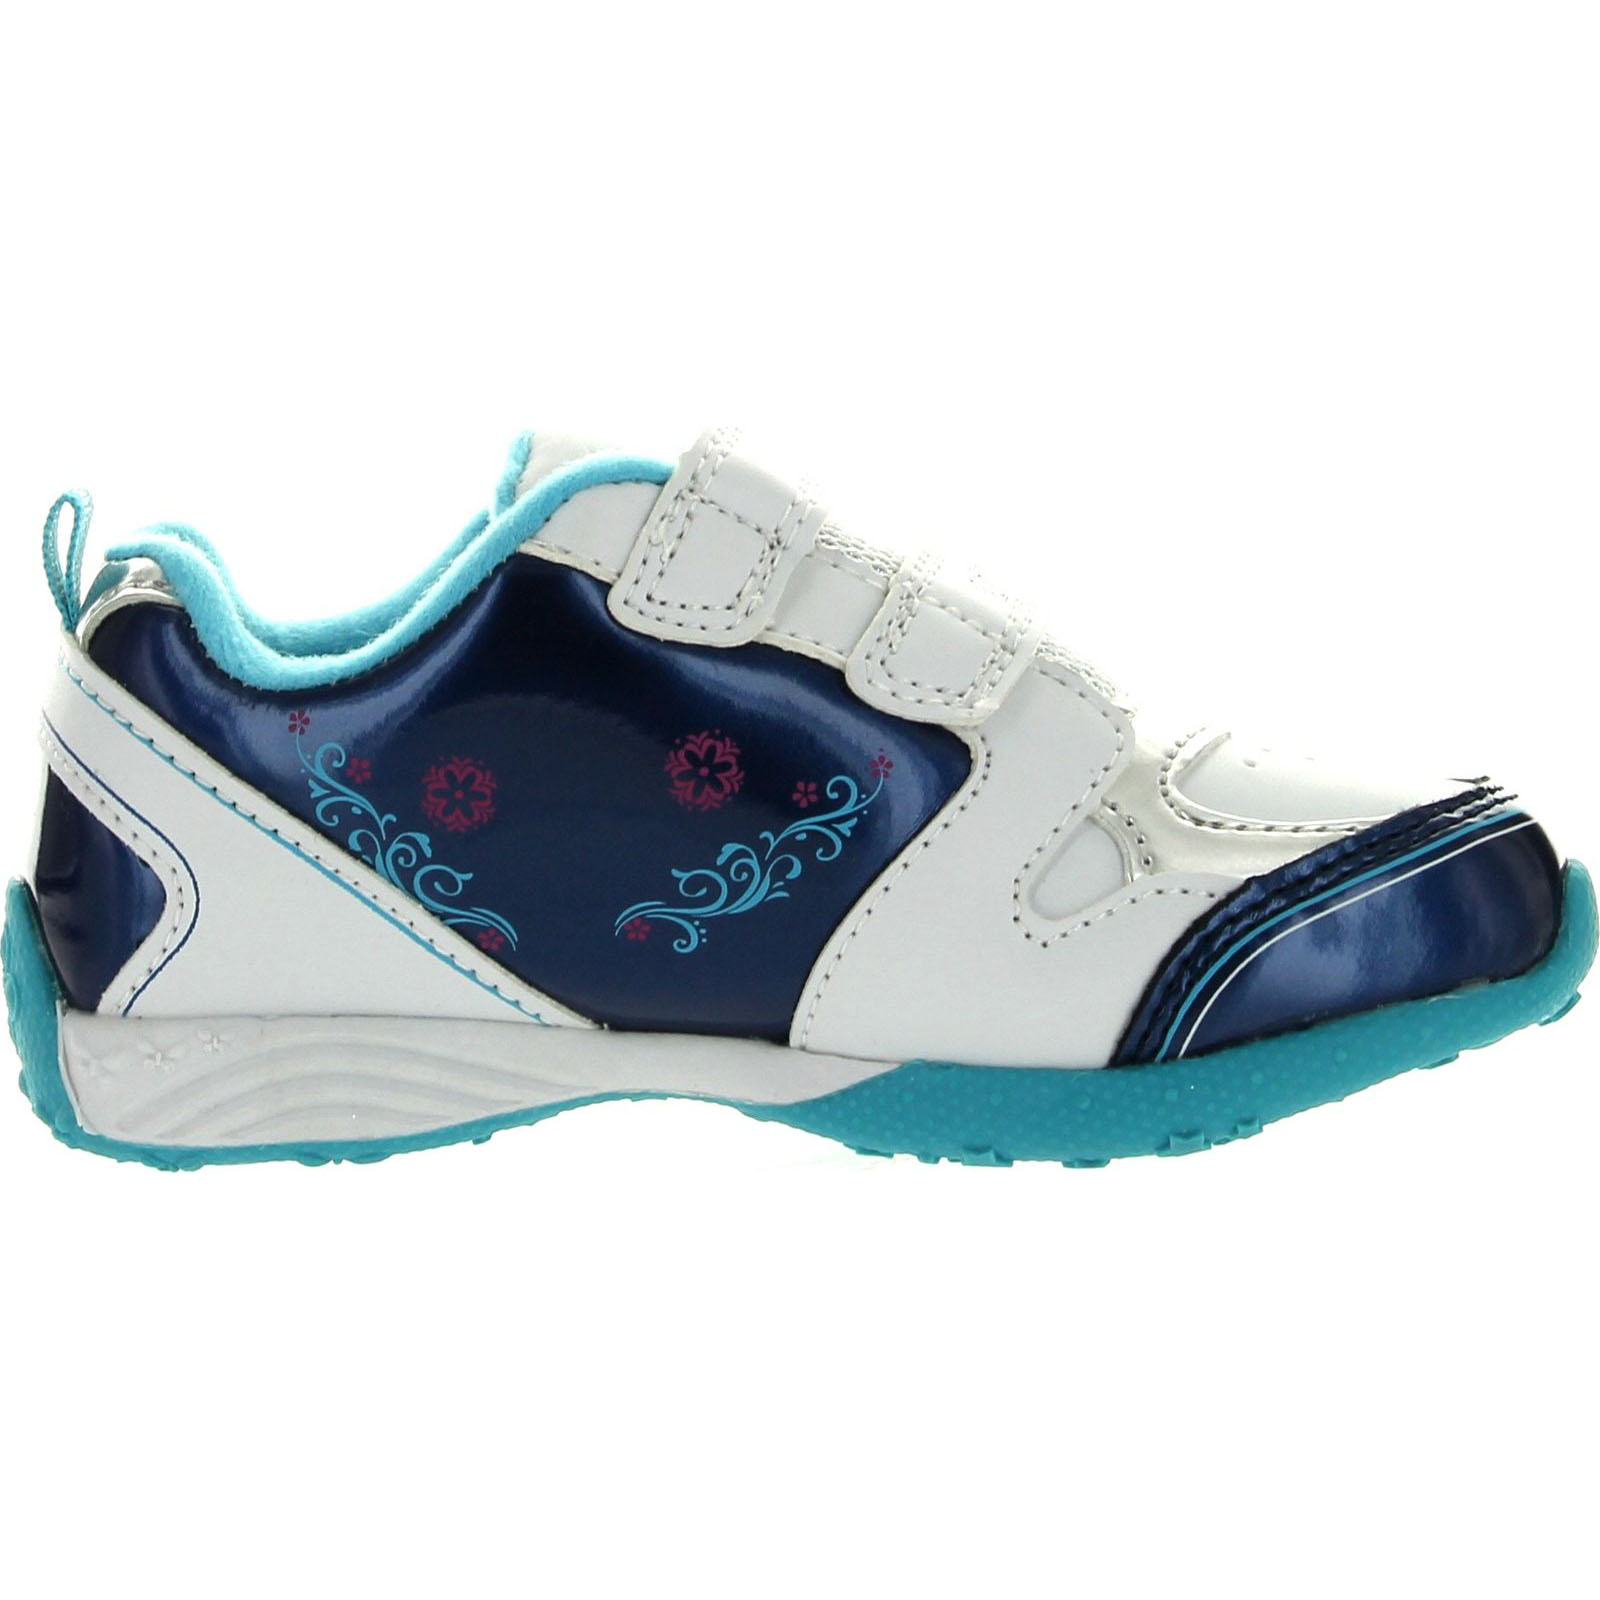 Disney Girls Frozen Princess Elsa and Anna Fashion Sneakers - image 2 of 4